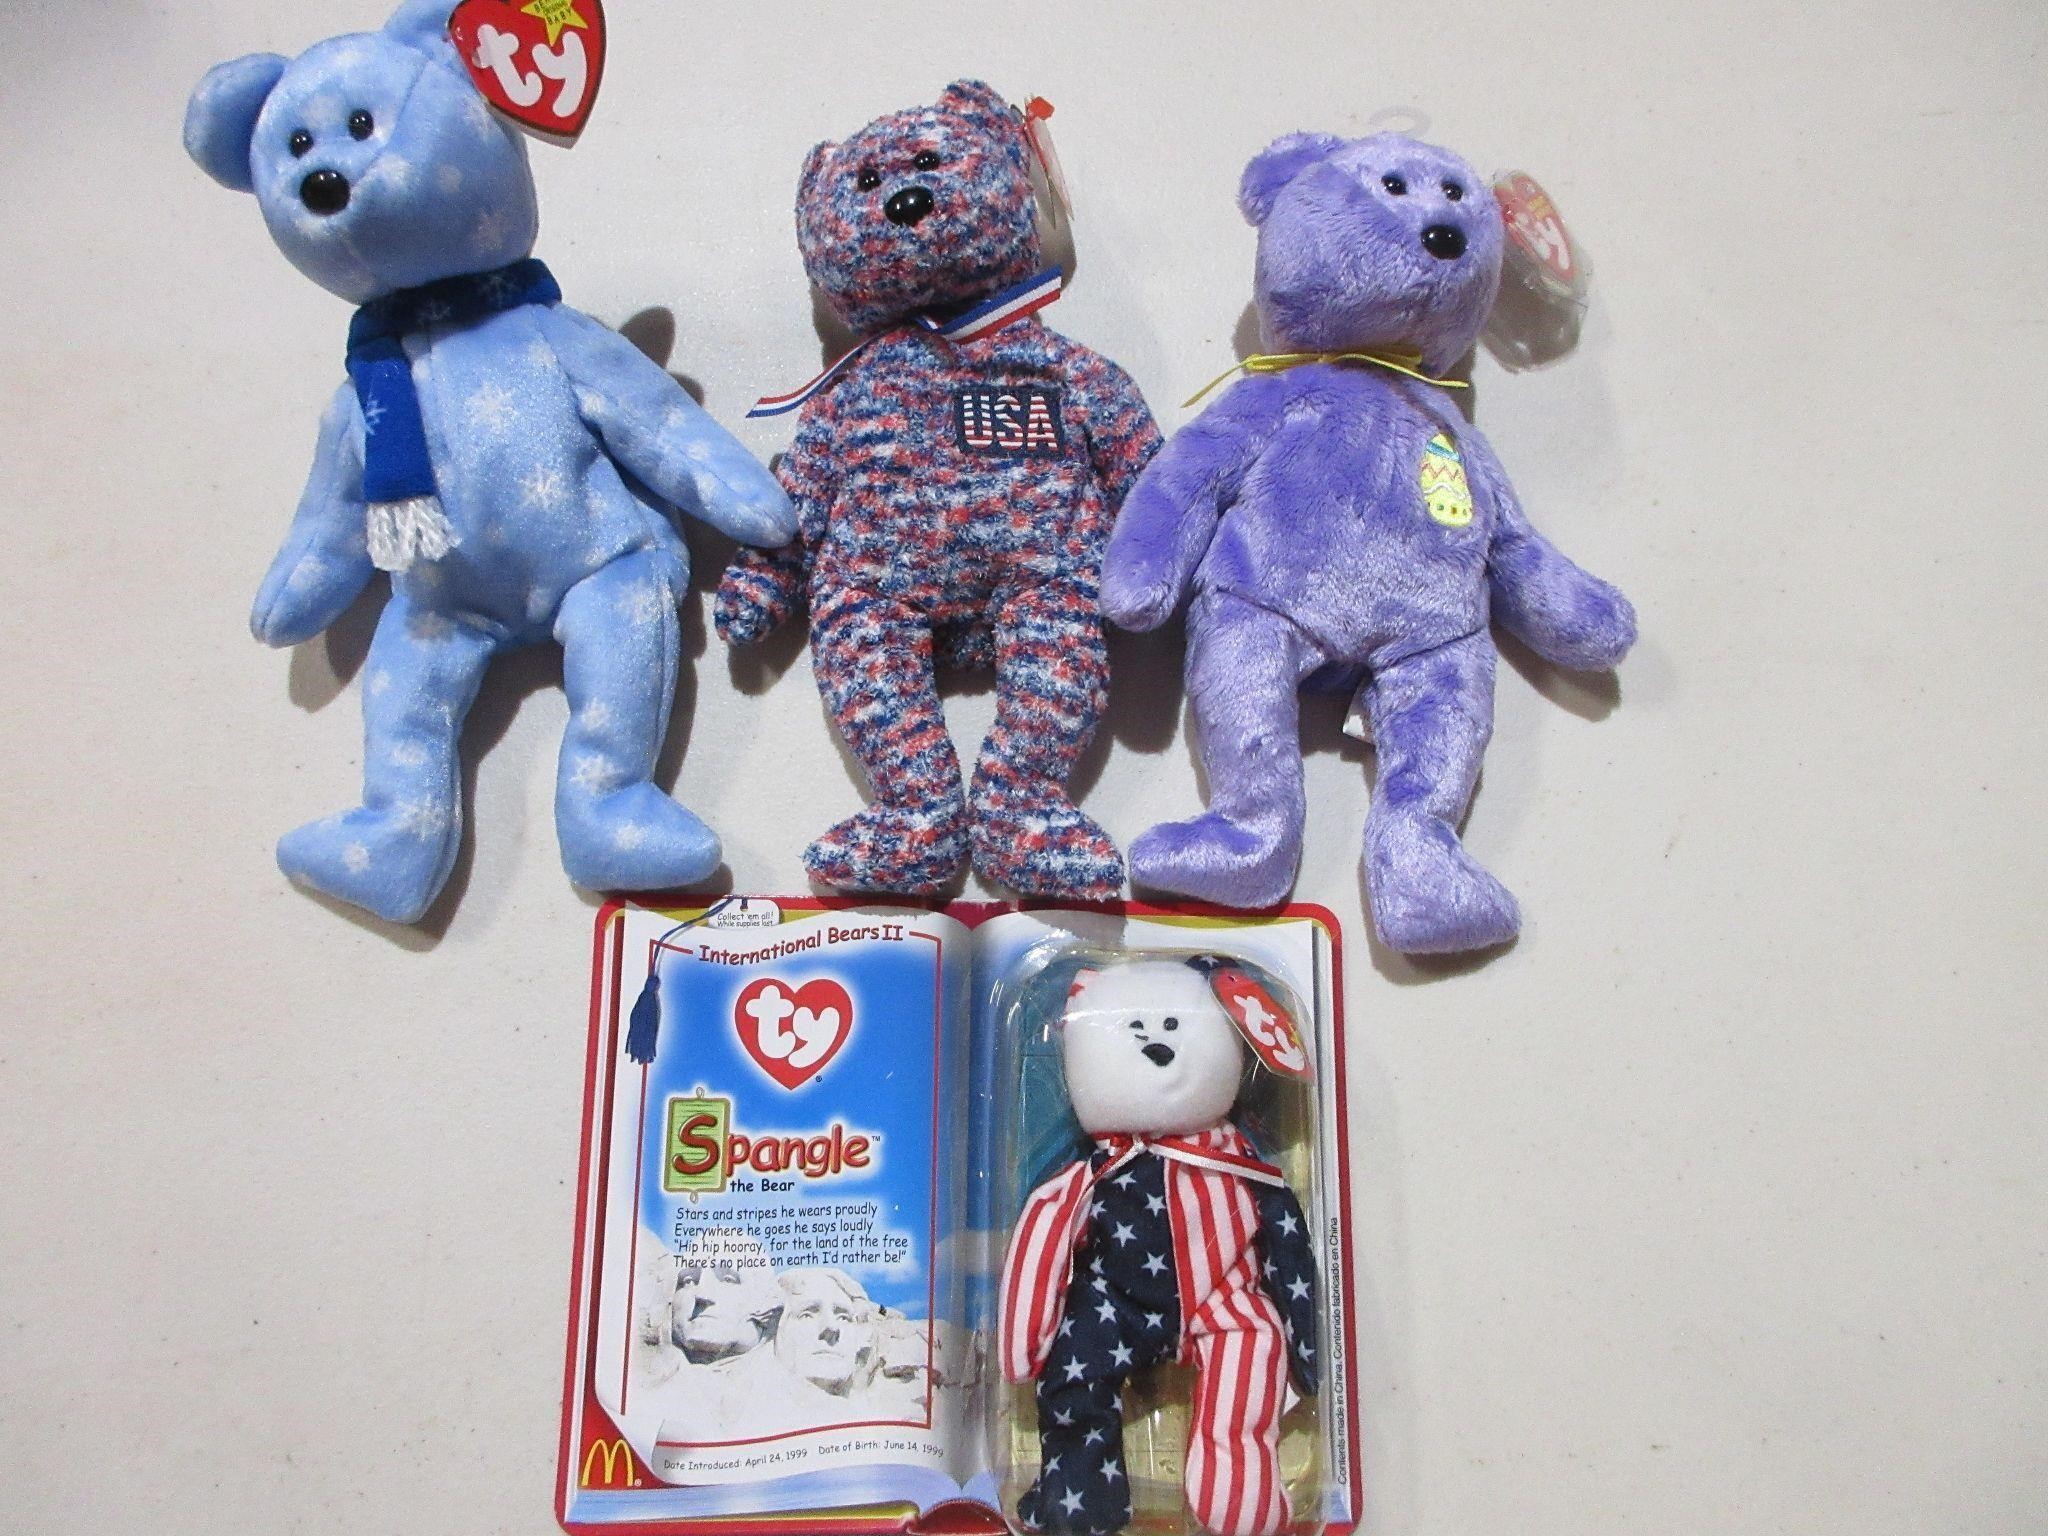 TY Collectibles-1999 Holiday Teddy, Eggs III, more